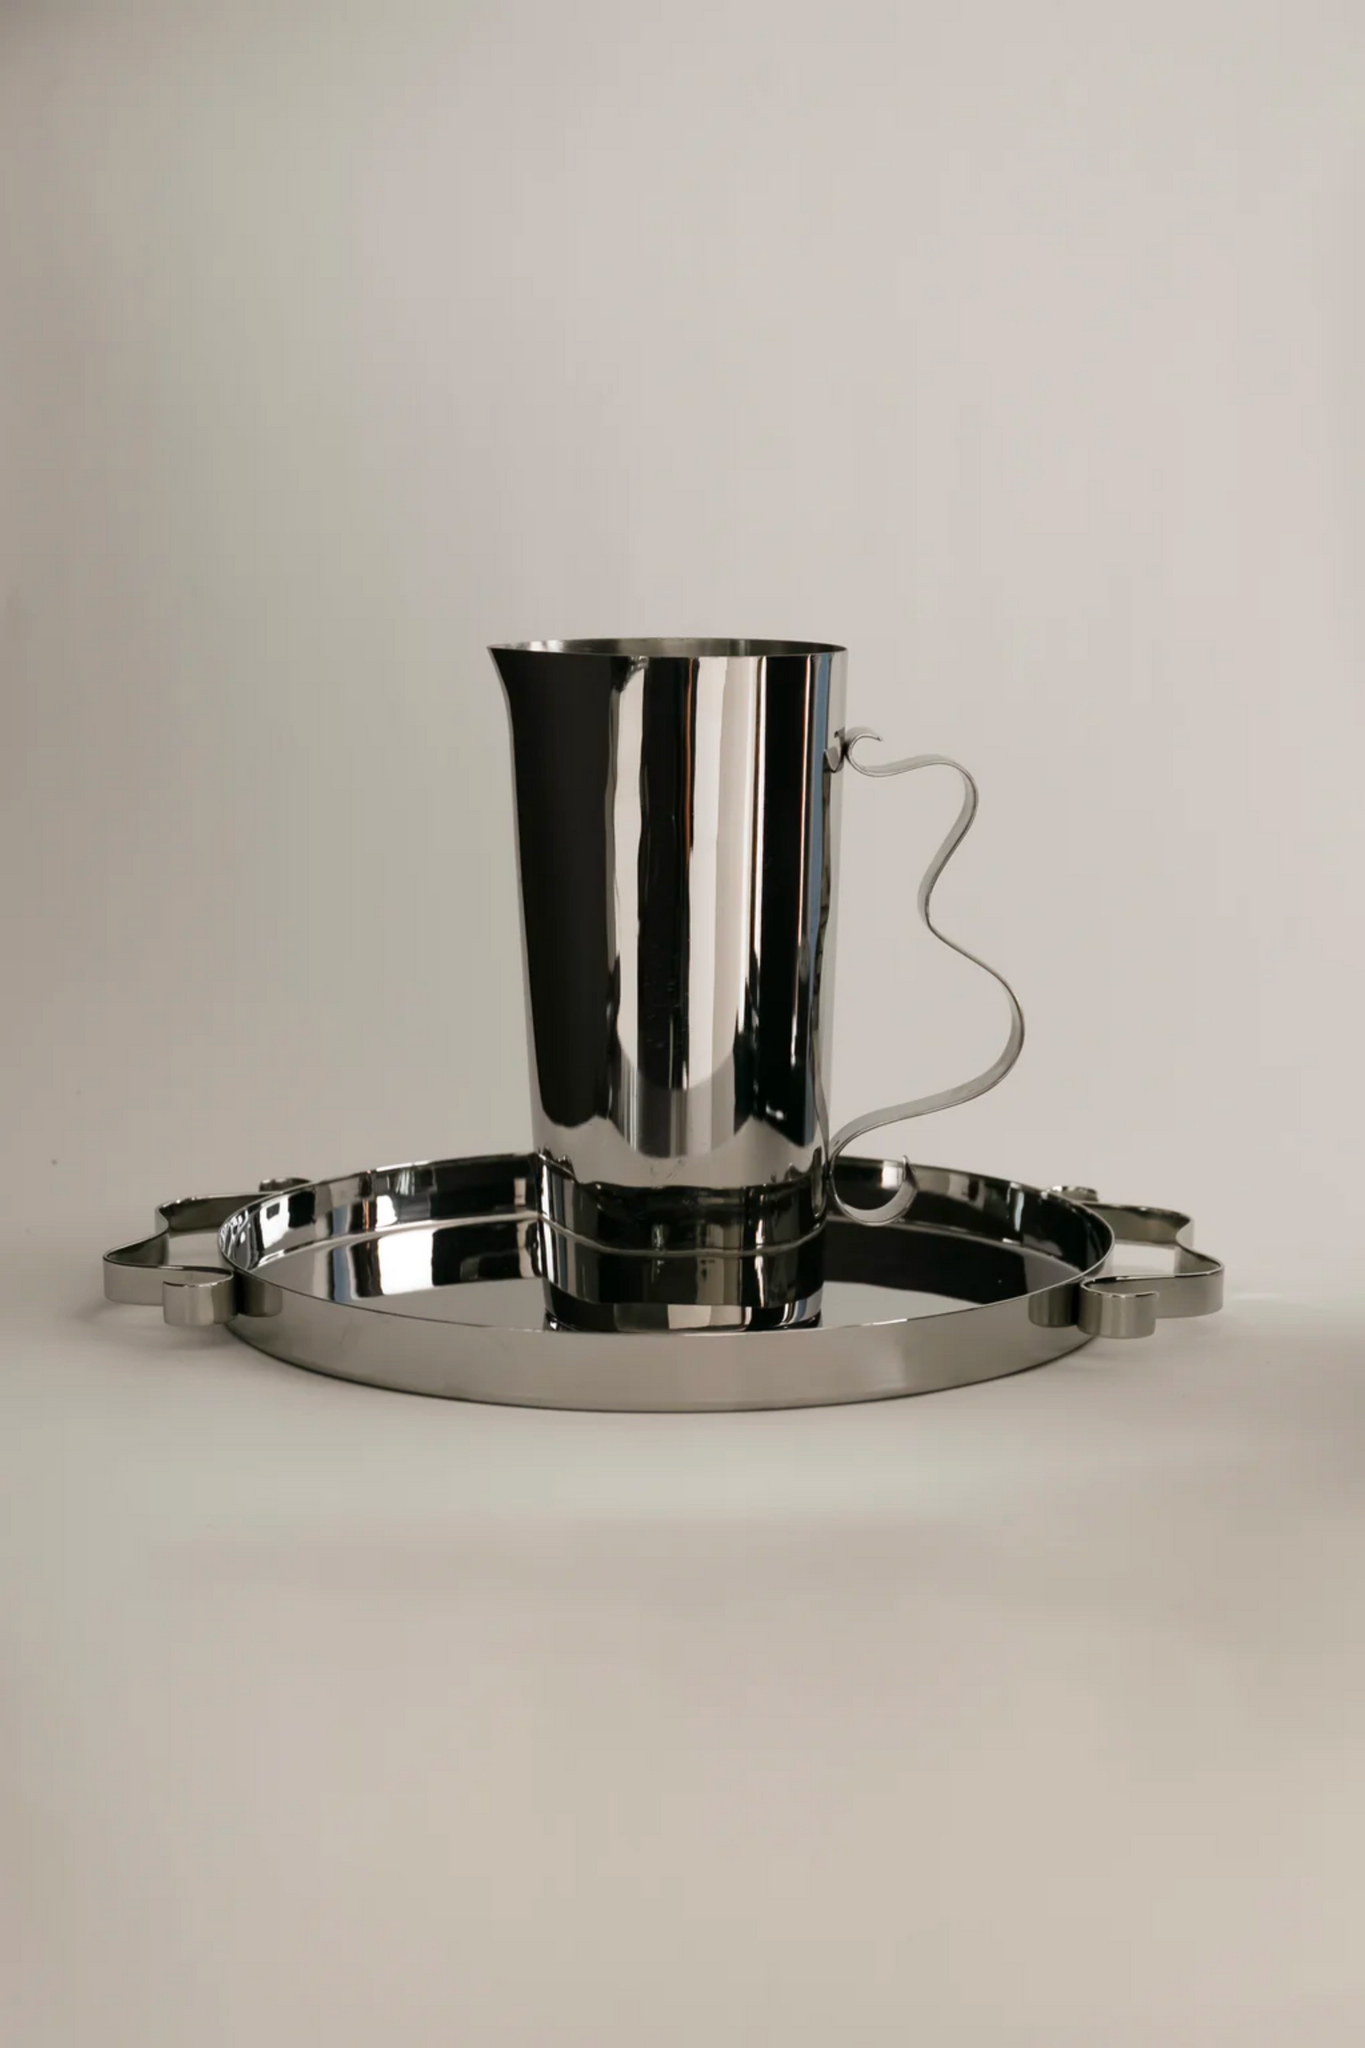 Stainless Steel Squiggle Tray Sophie Lou Jacobsen, shown with squiggle pitcher